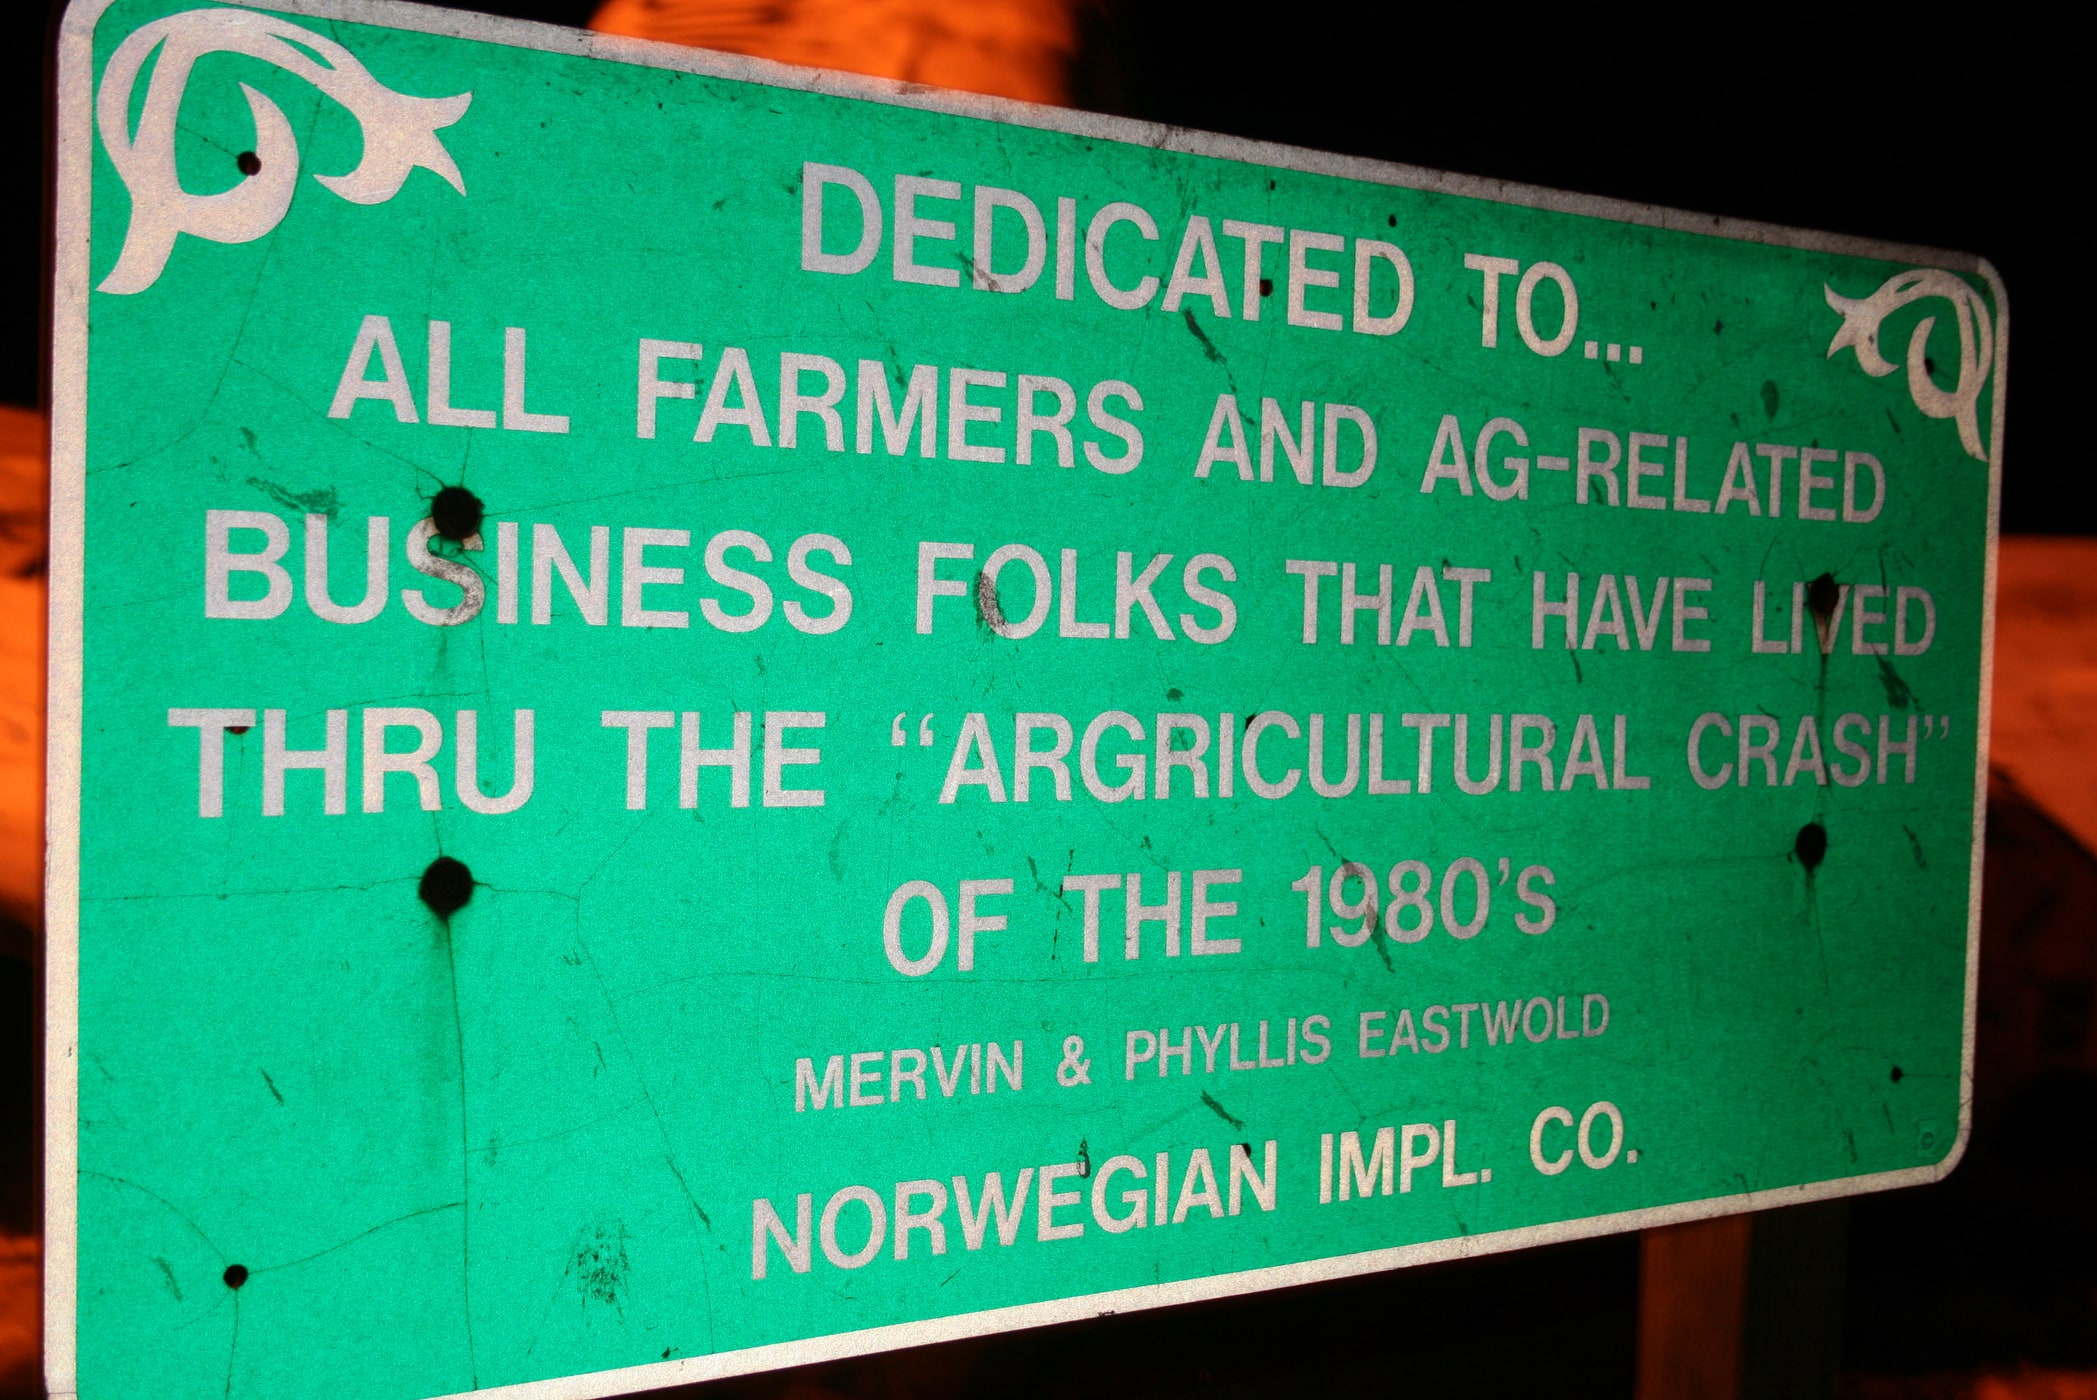 Agricultural Crash Monument in Norway, Illinois